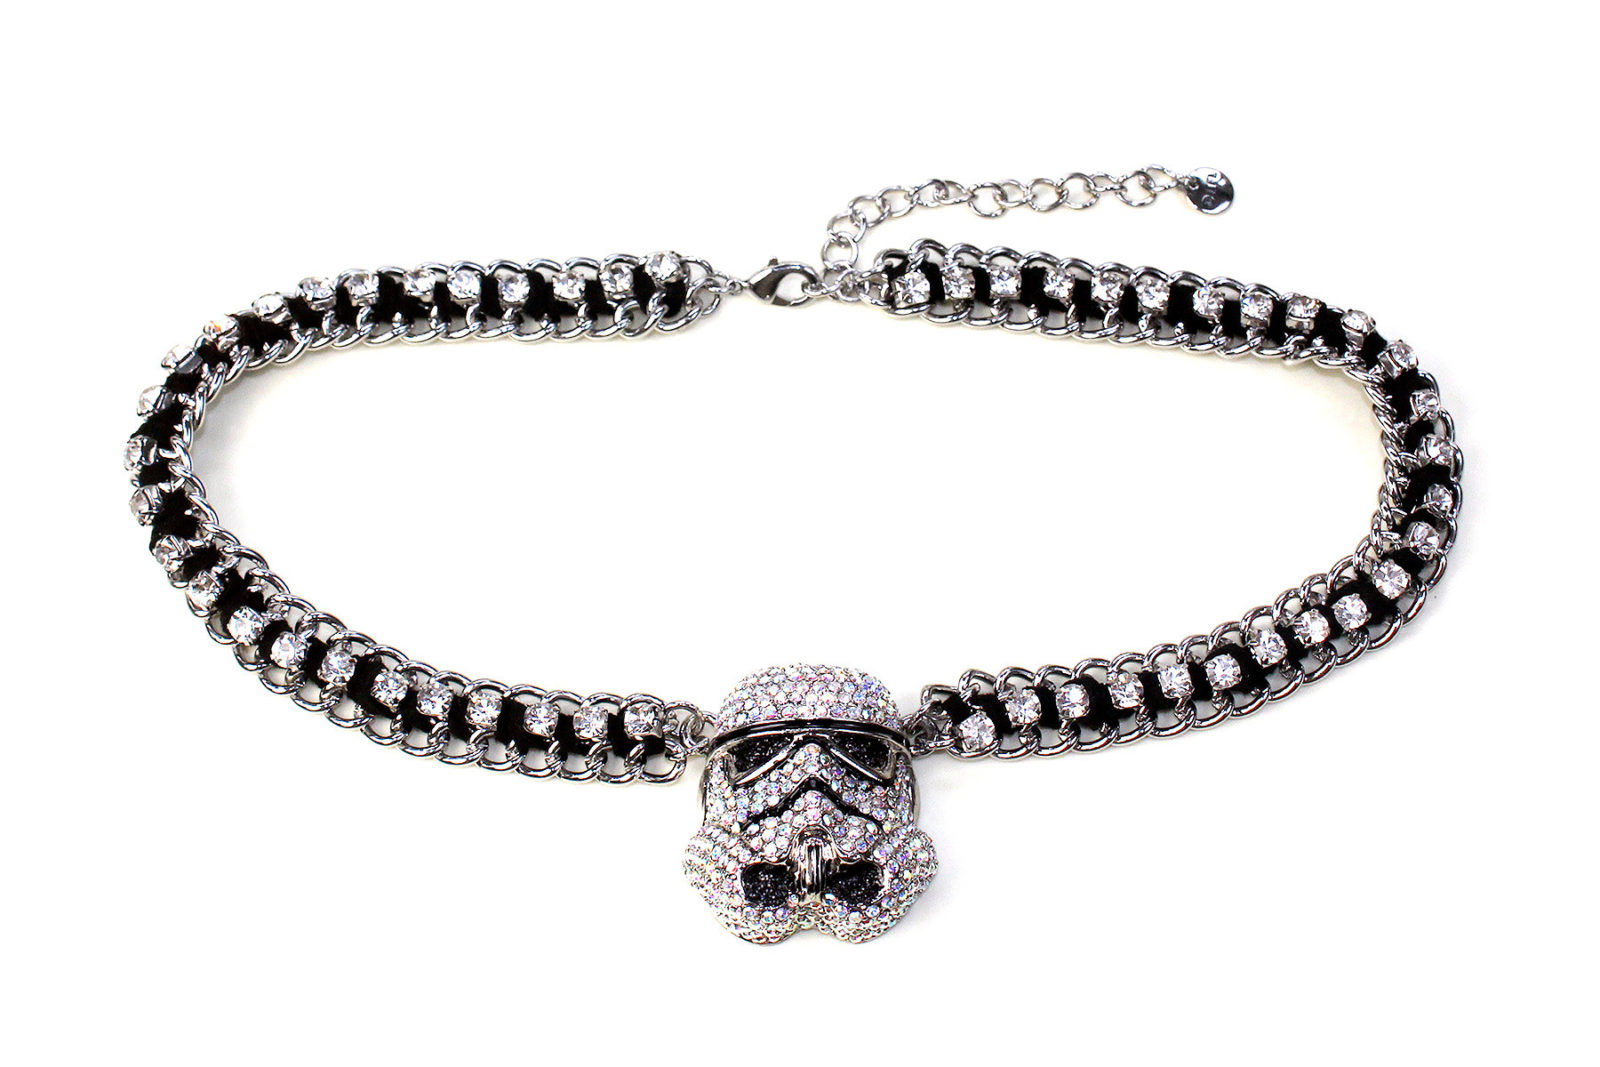 HSN - 'bling' Stormtrooper helmet necklace by SG@NYC, LLC